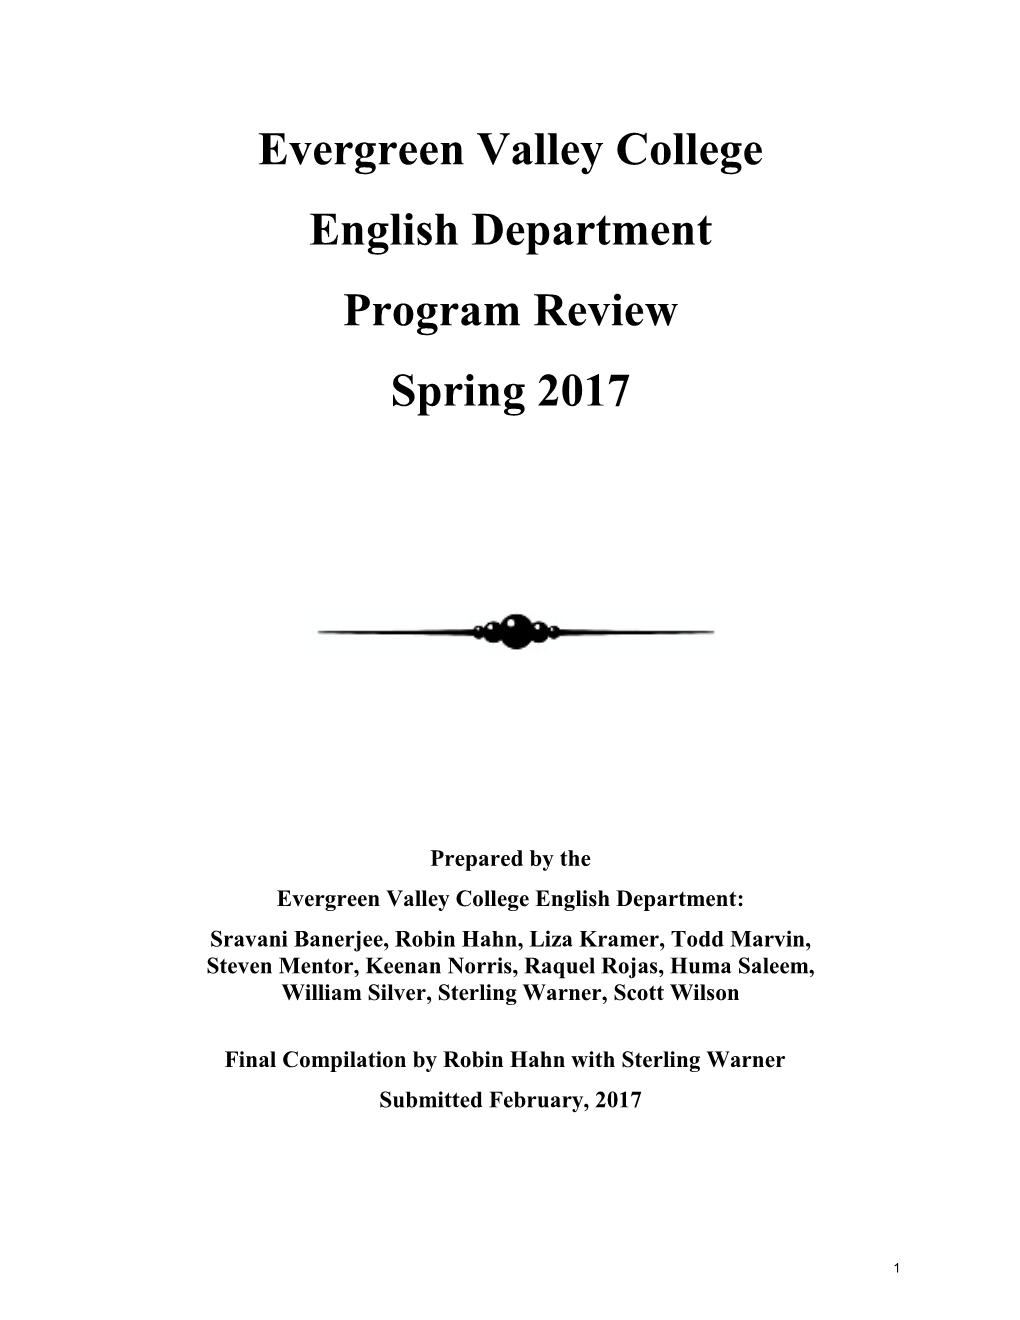 Evergreen Valley College English Department Program Review Spring 2017